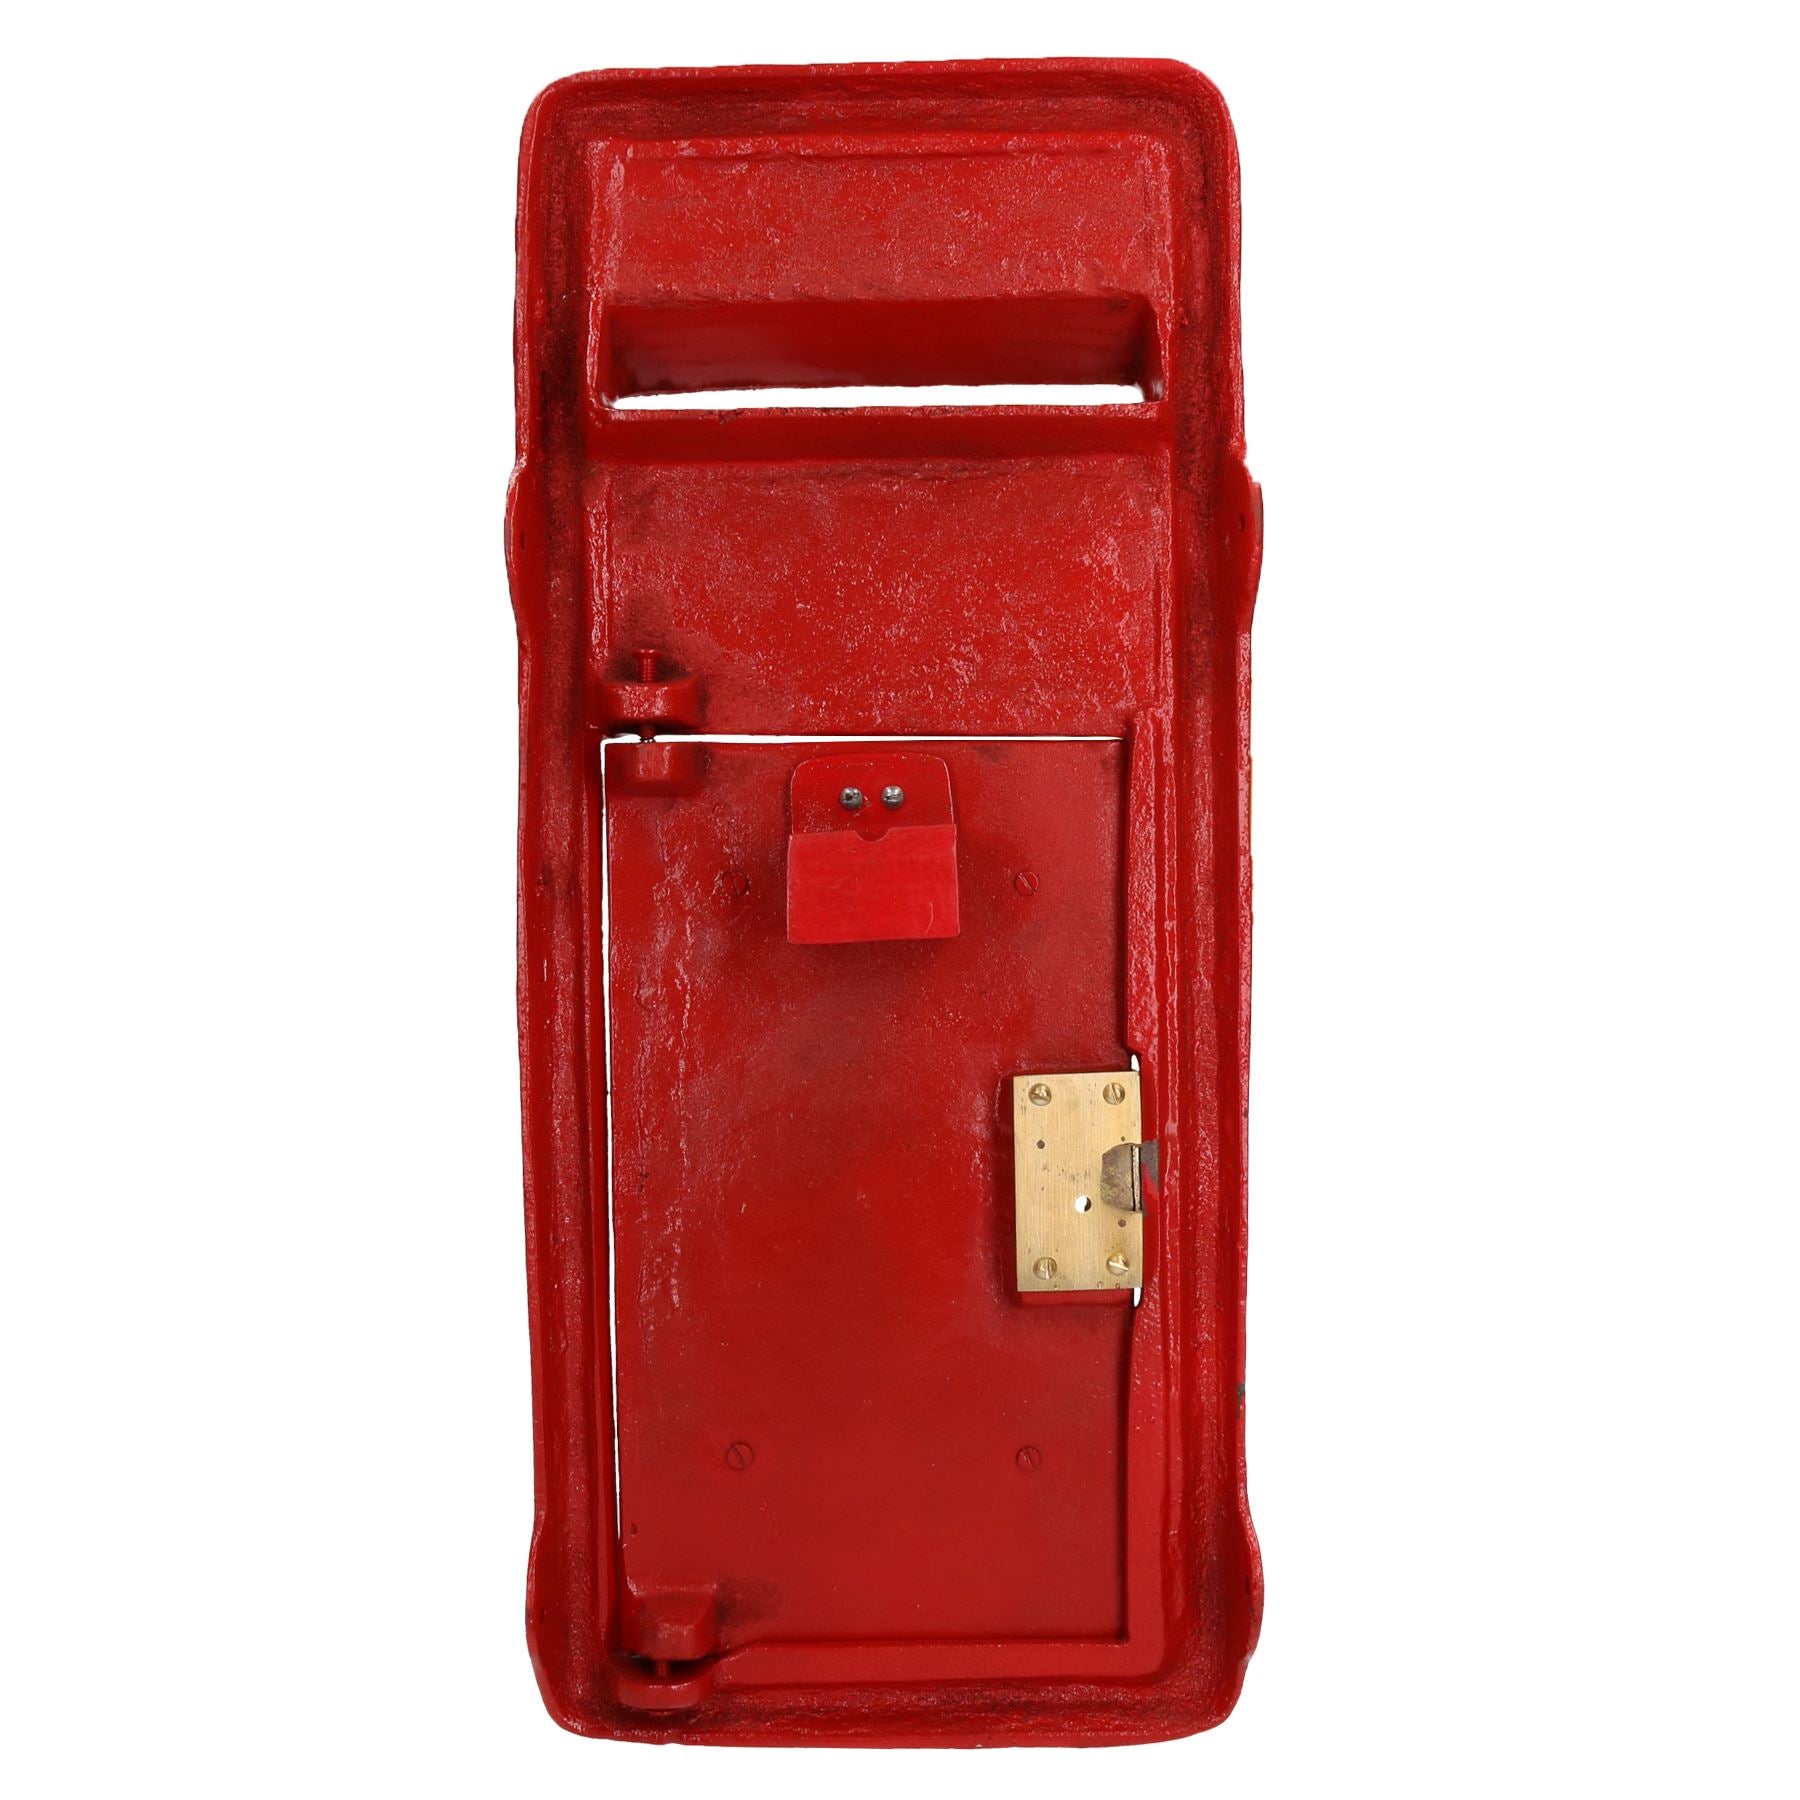 ER Royal Mail Post Box Wall Mount Replica Red Post Office Lockable GB Front